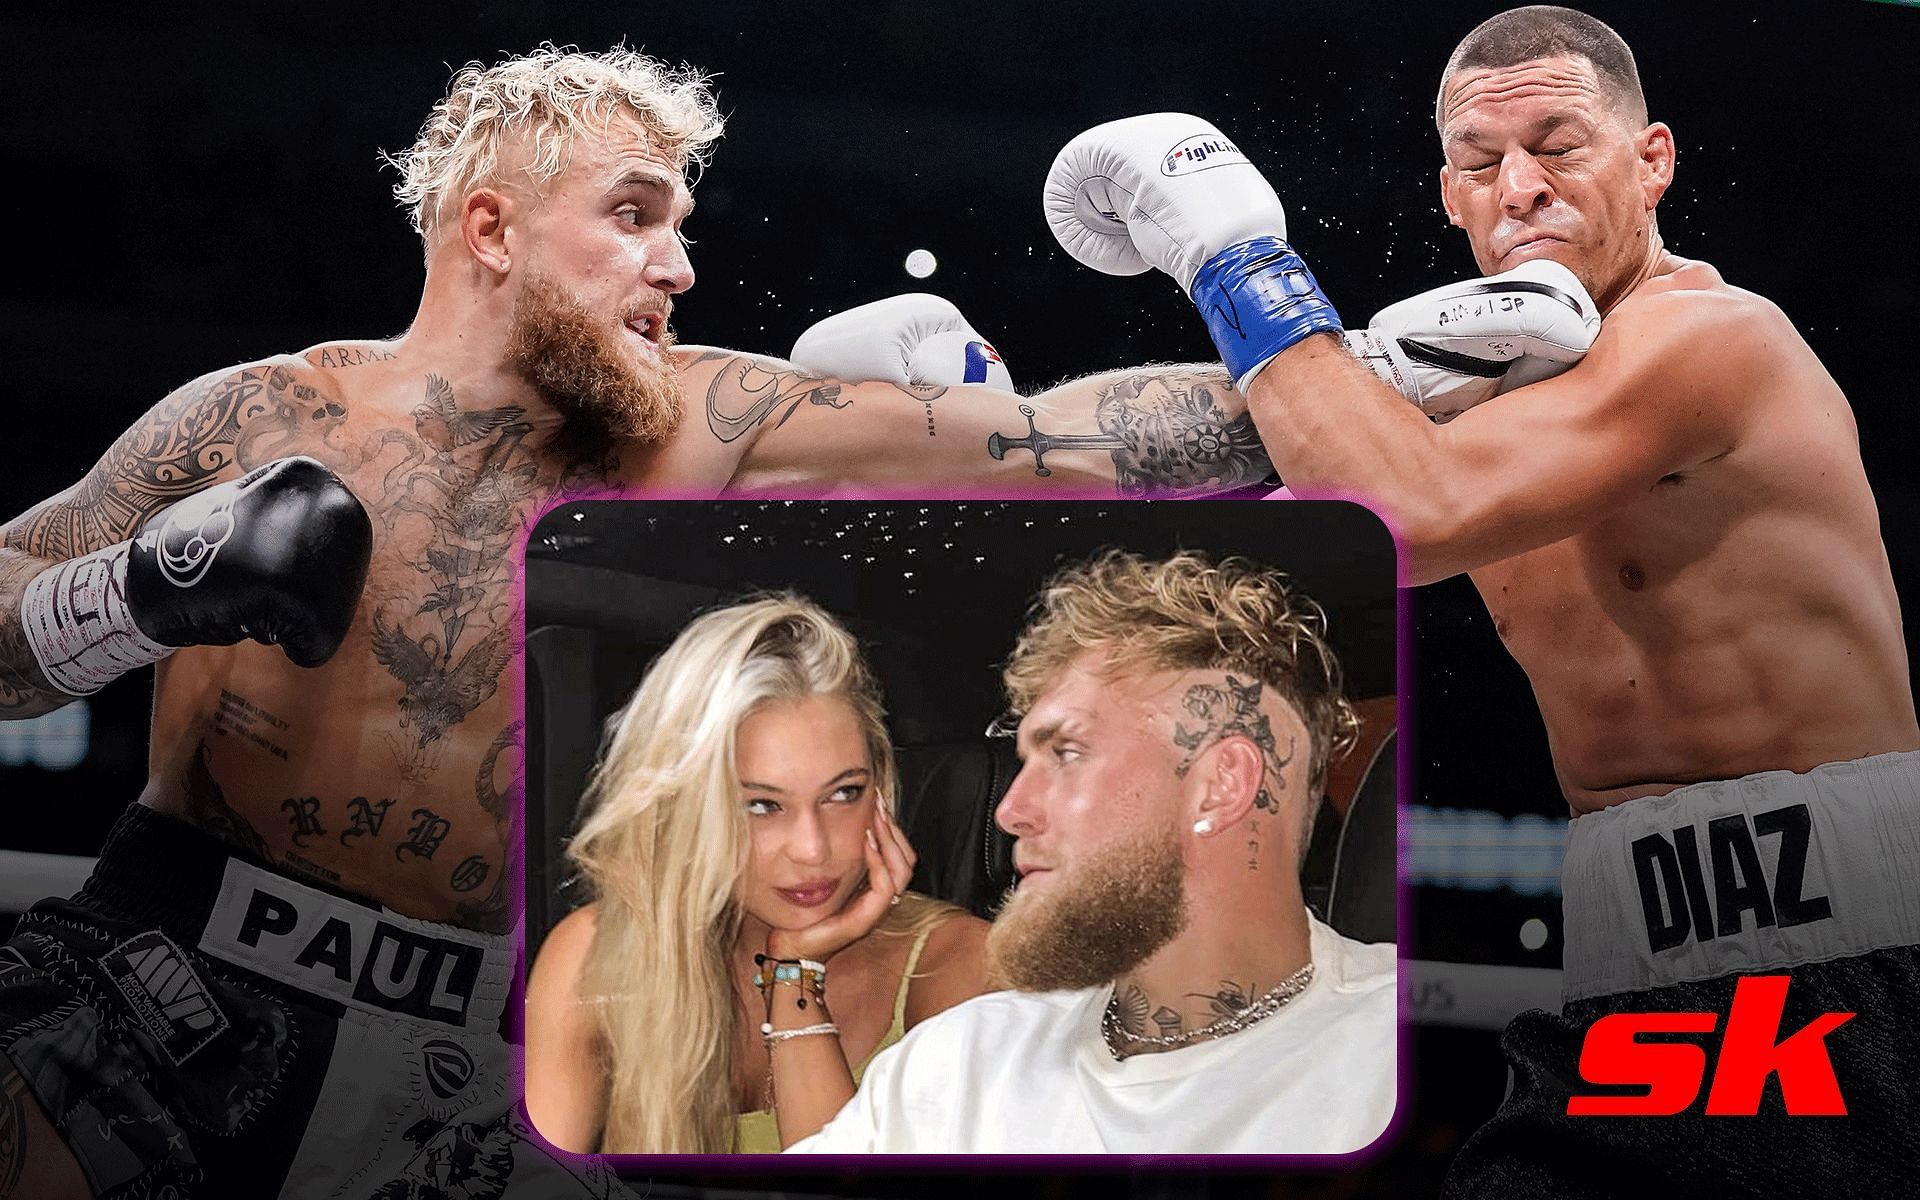 Foreground - Jake Paul and Jutta Leerdam, Paul vs Nate Diaz in action in the background [Images via @juttaleerdam Instagram and Getty Images]